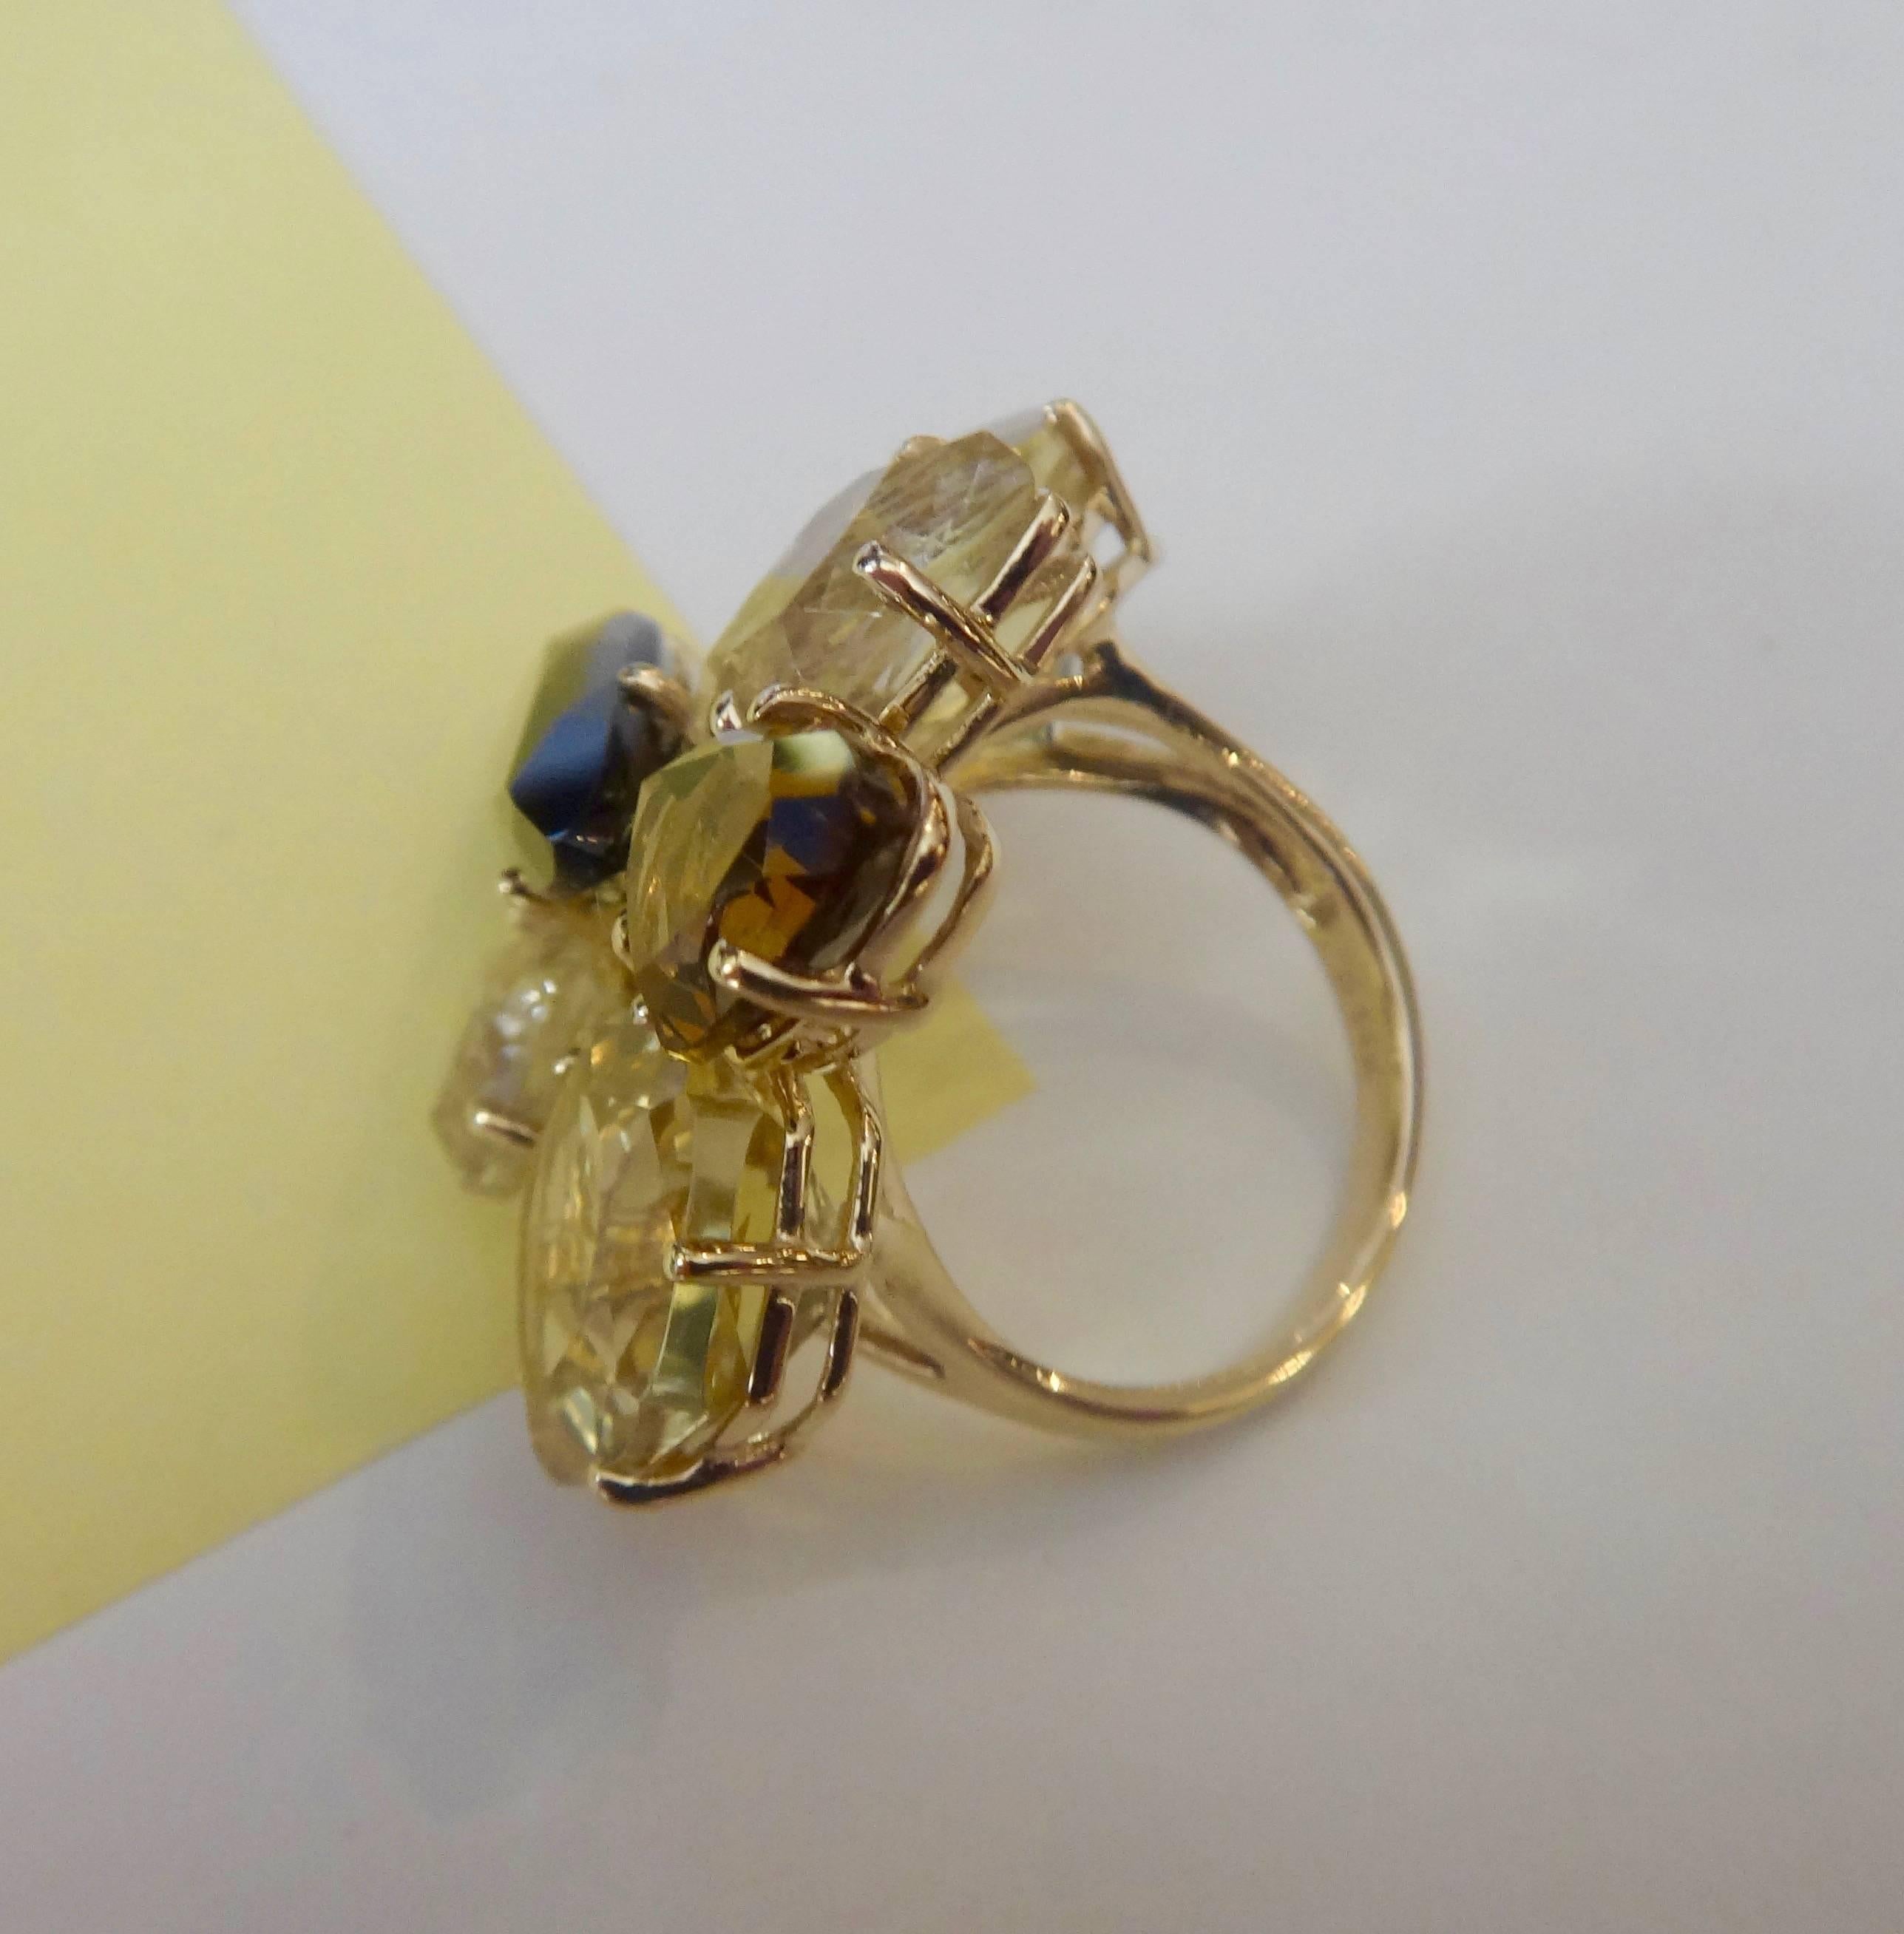 Autumnal colors of yellows and browns in six free form shaped gems of lemon citrine, rutilated and smokey quartz are clustered together in this dramatic cocktail ring.  All prong set in 14k yellow gold.  Ring size 7 and may be easily sized.  PLEASE